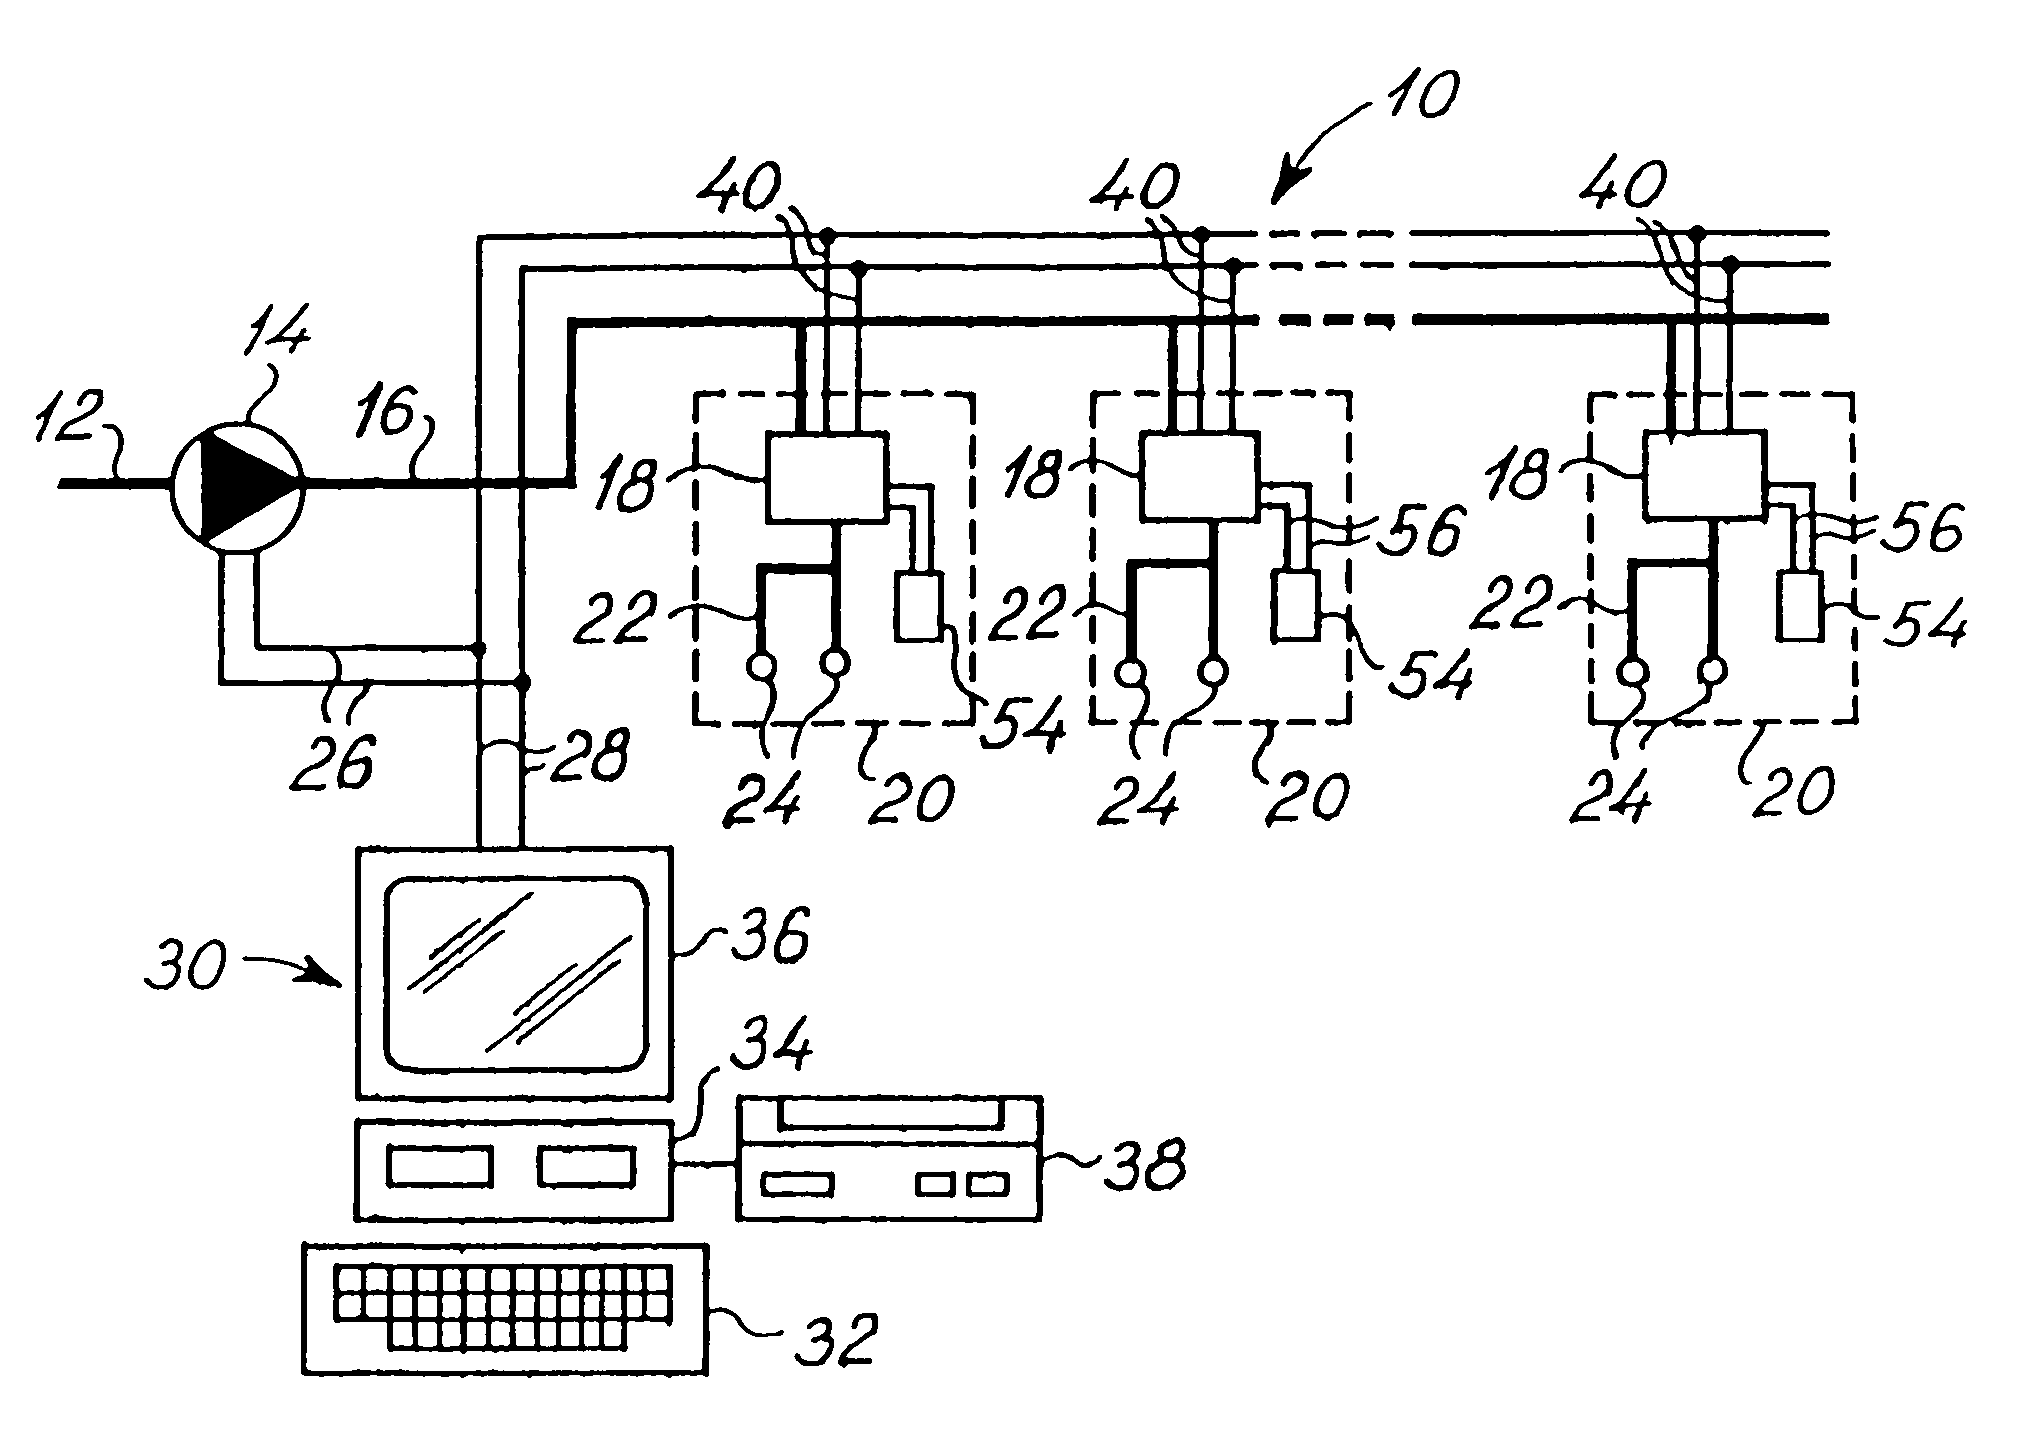 Two-wire controlling and monitoring system for irrigation of localized areas of soil